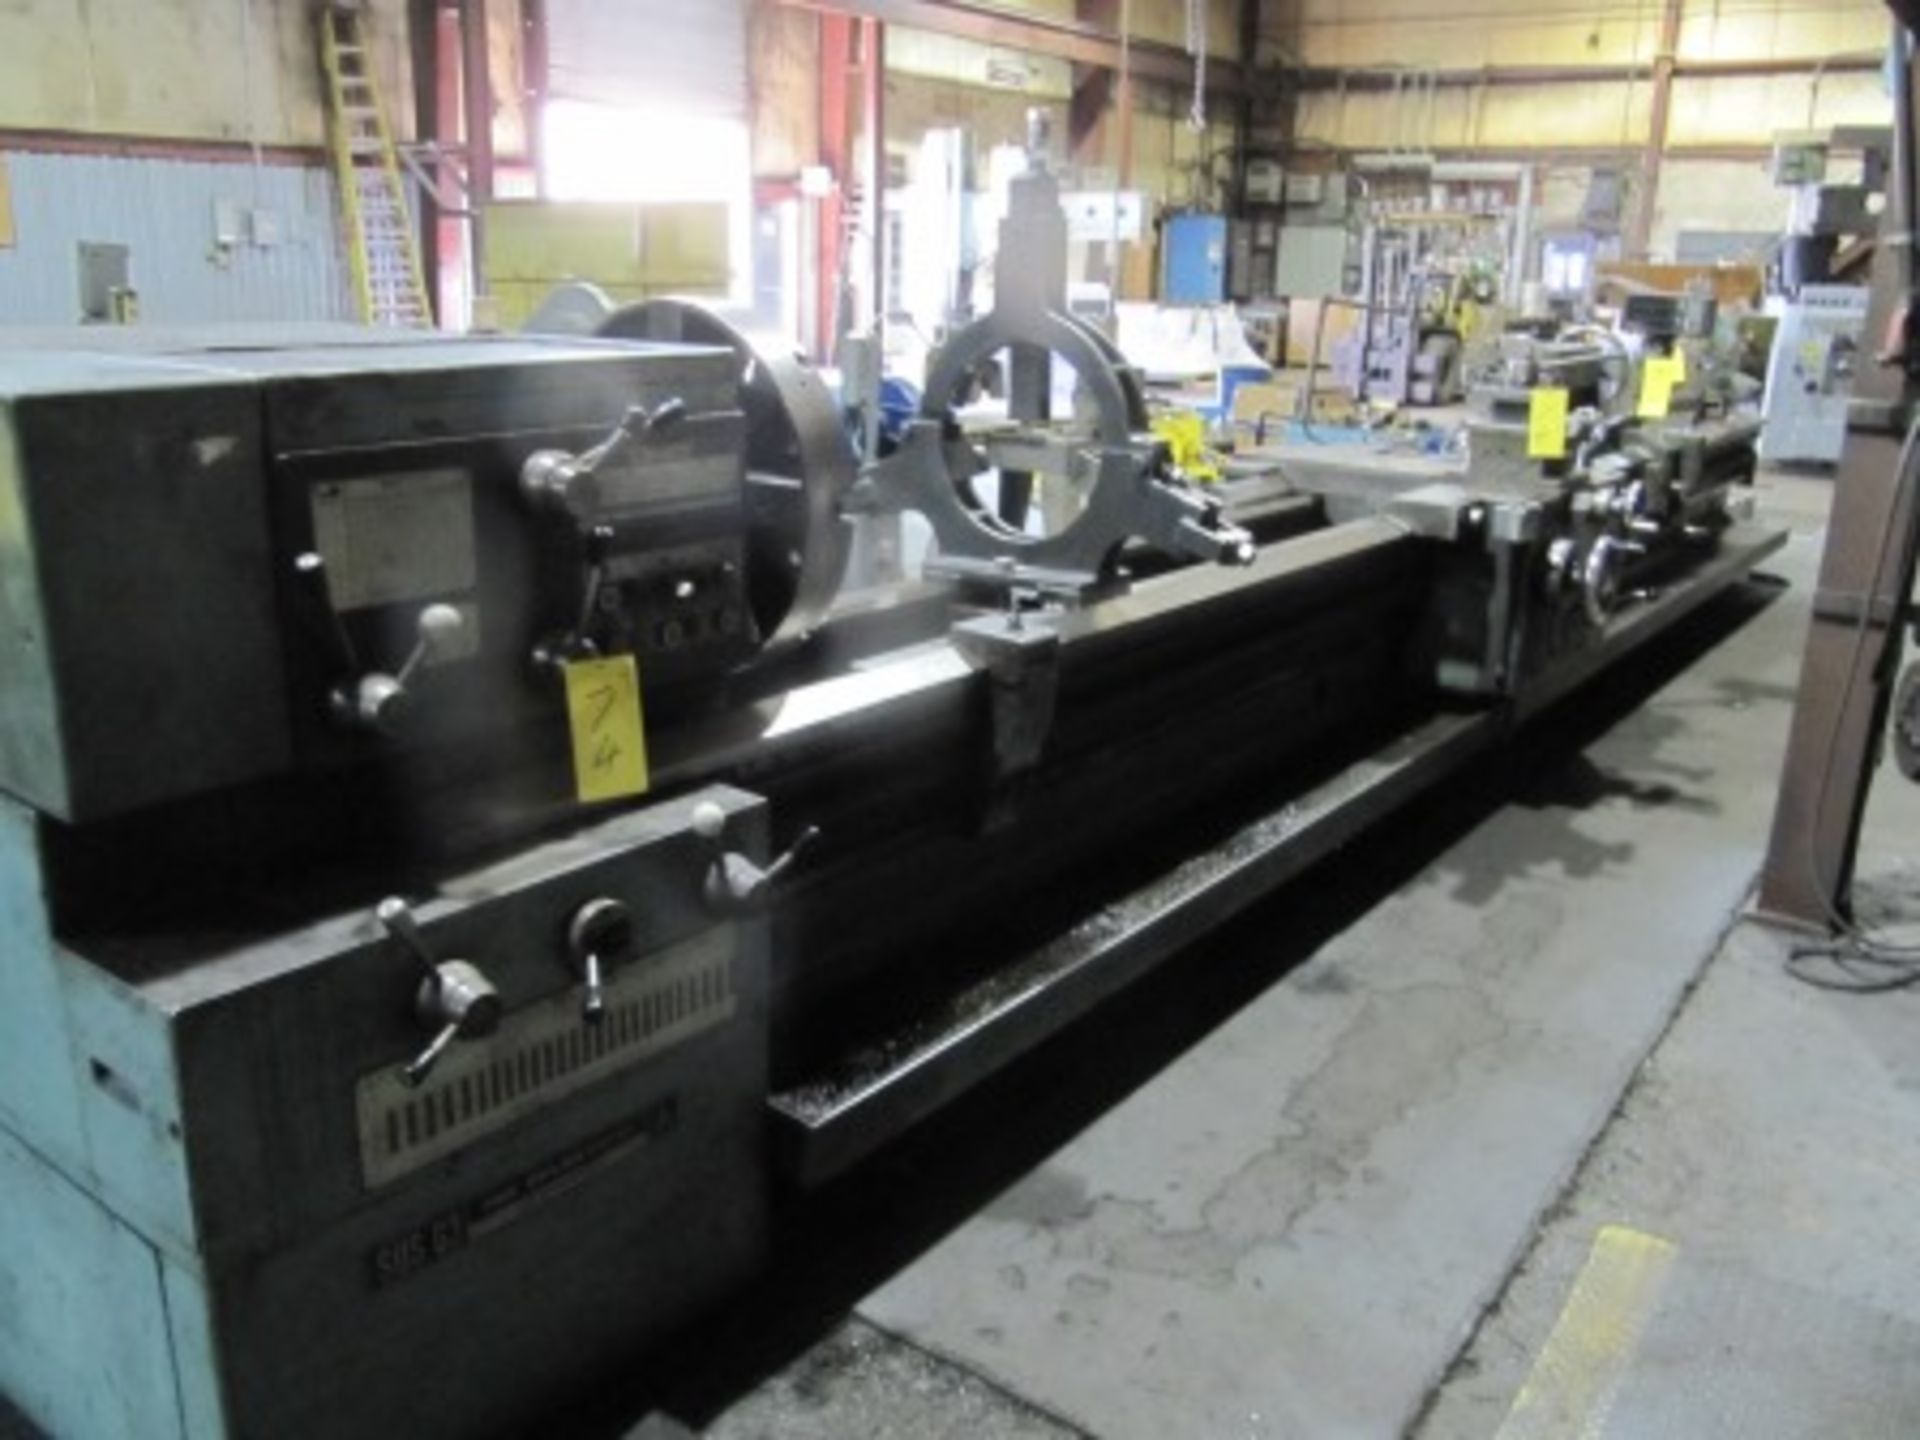 TOS SUS-63 ENGINE LATHE, FAGOR 2-AXIS DRO, 20" 4-JAW CHUCK, 25" SWING, 280" BETWEEN CENTERS, 3.25"